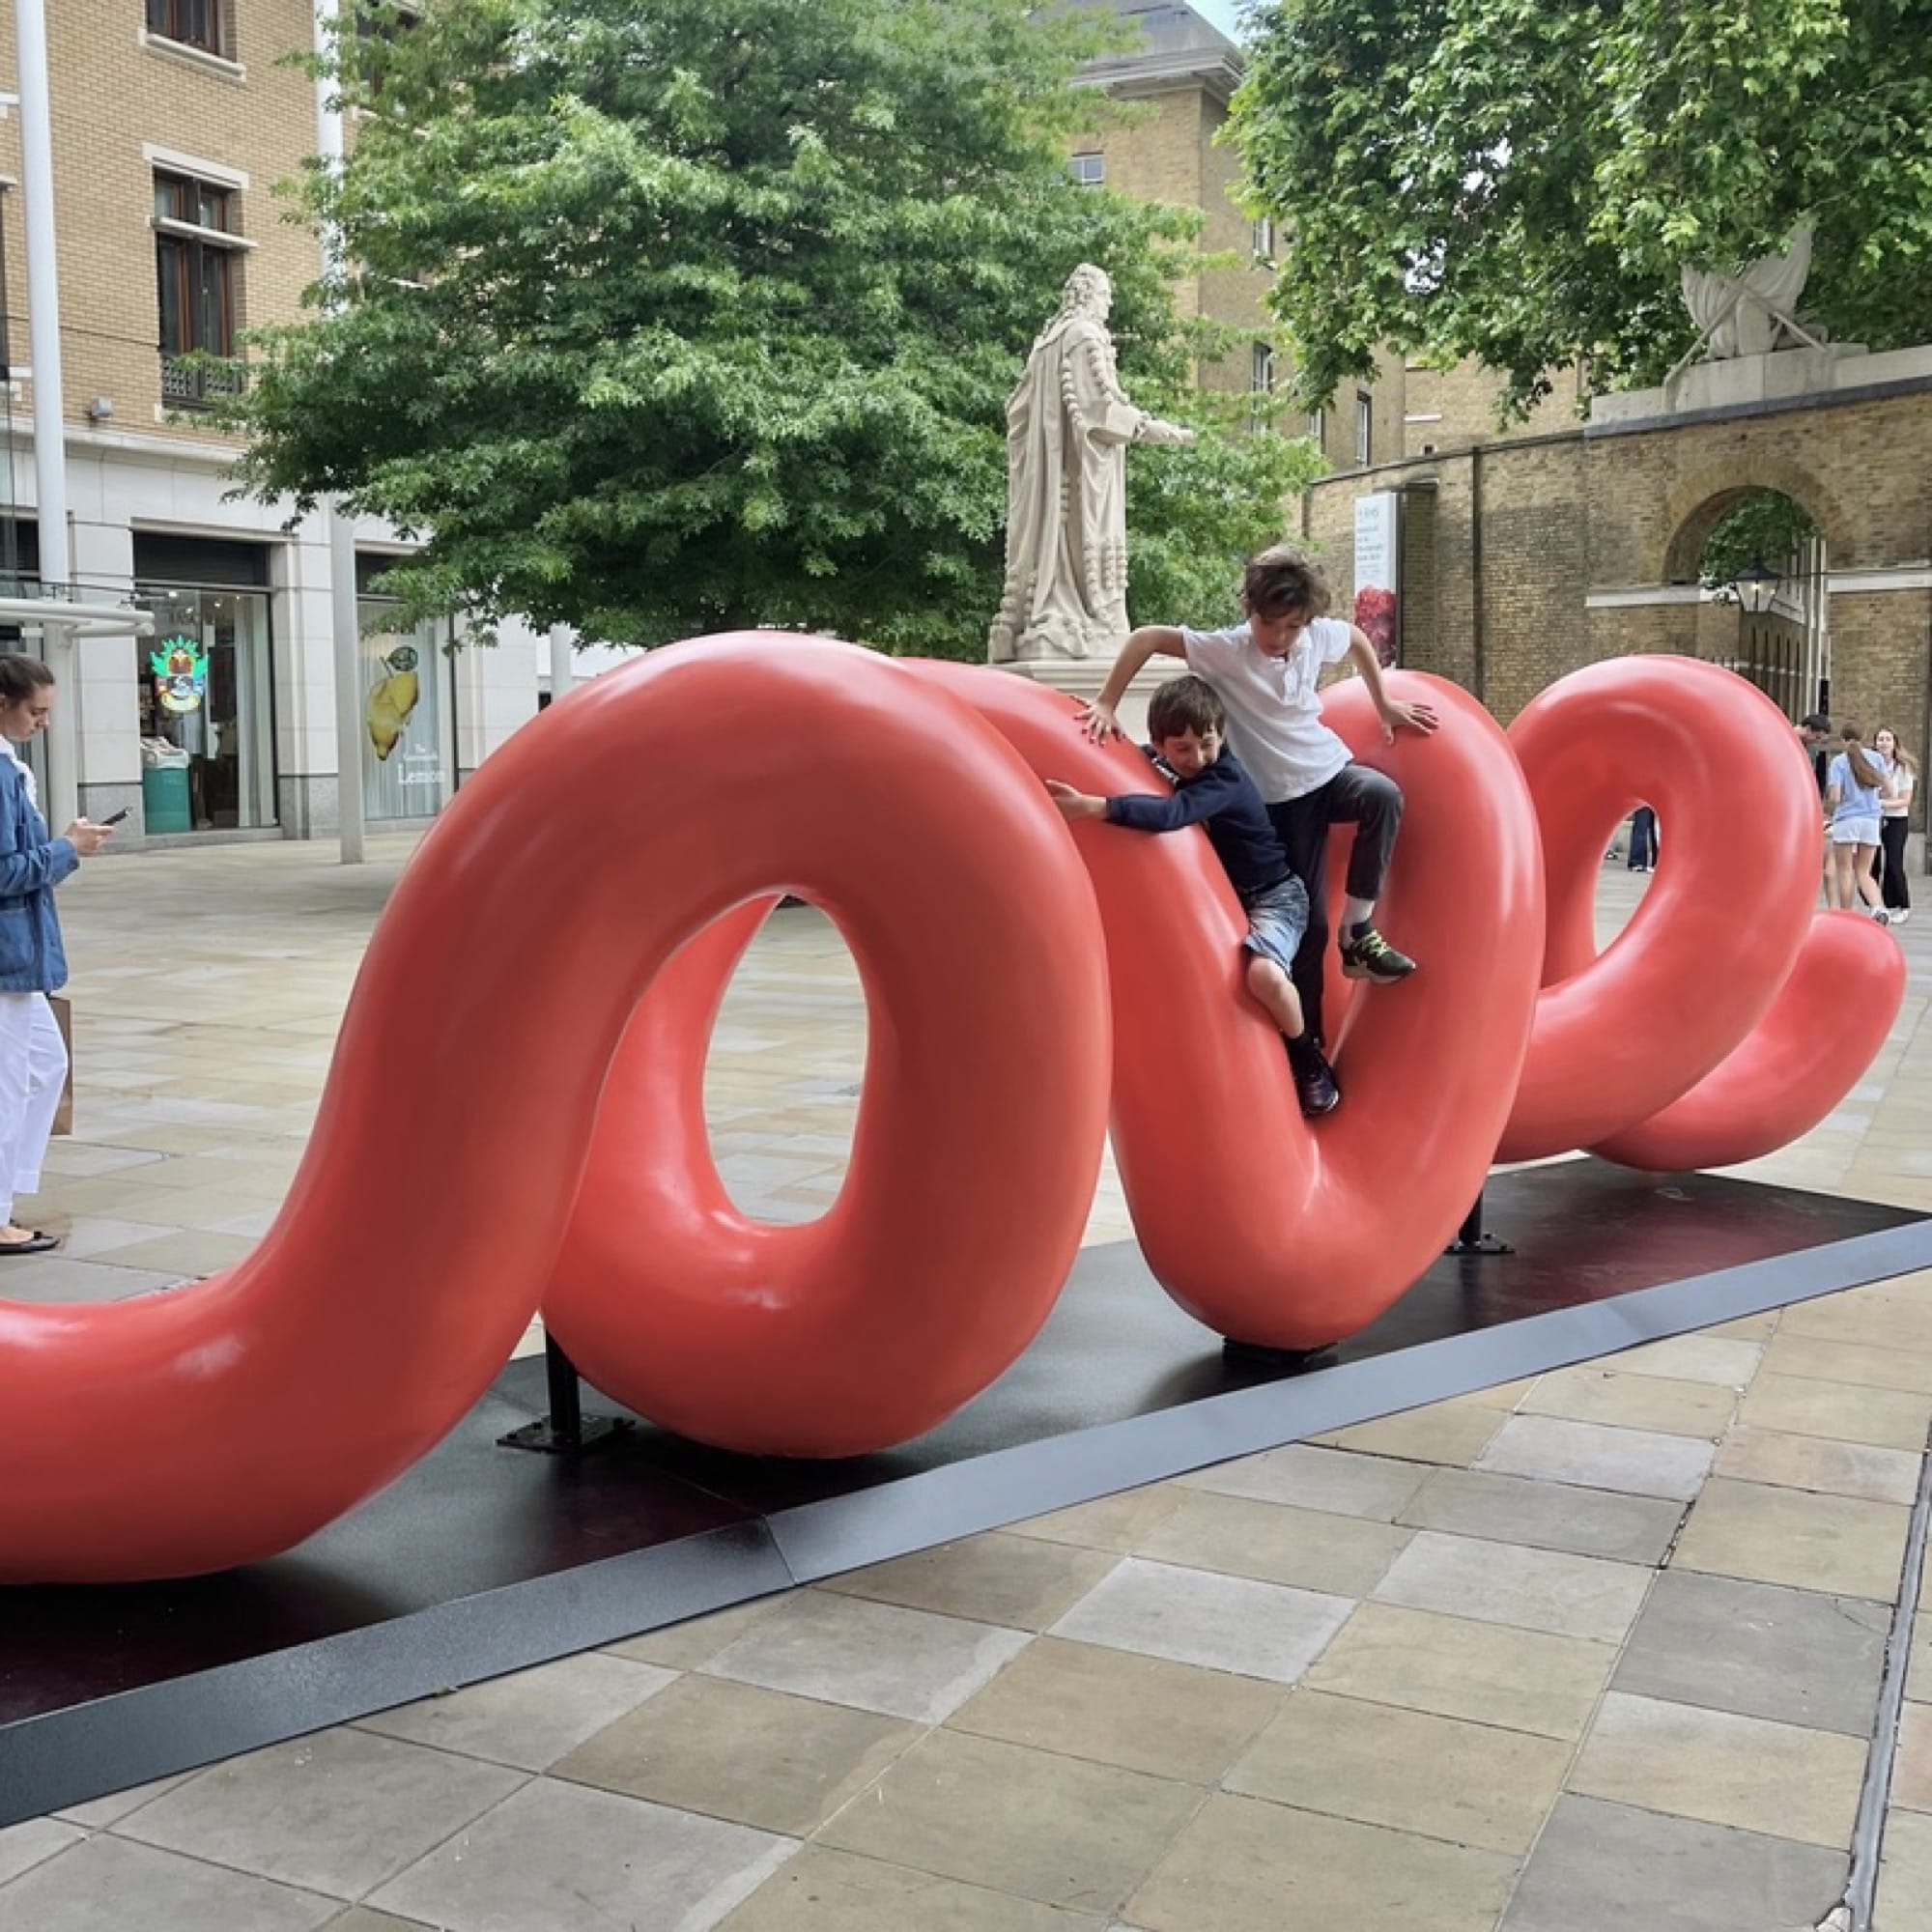 a large-scale, red public sculpture of curving lines that spell the word "love" when viewed from the right perspective, shown in this image with children climbing on top of it in London's Duke of York square